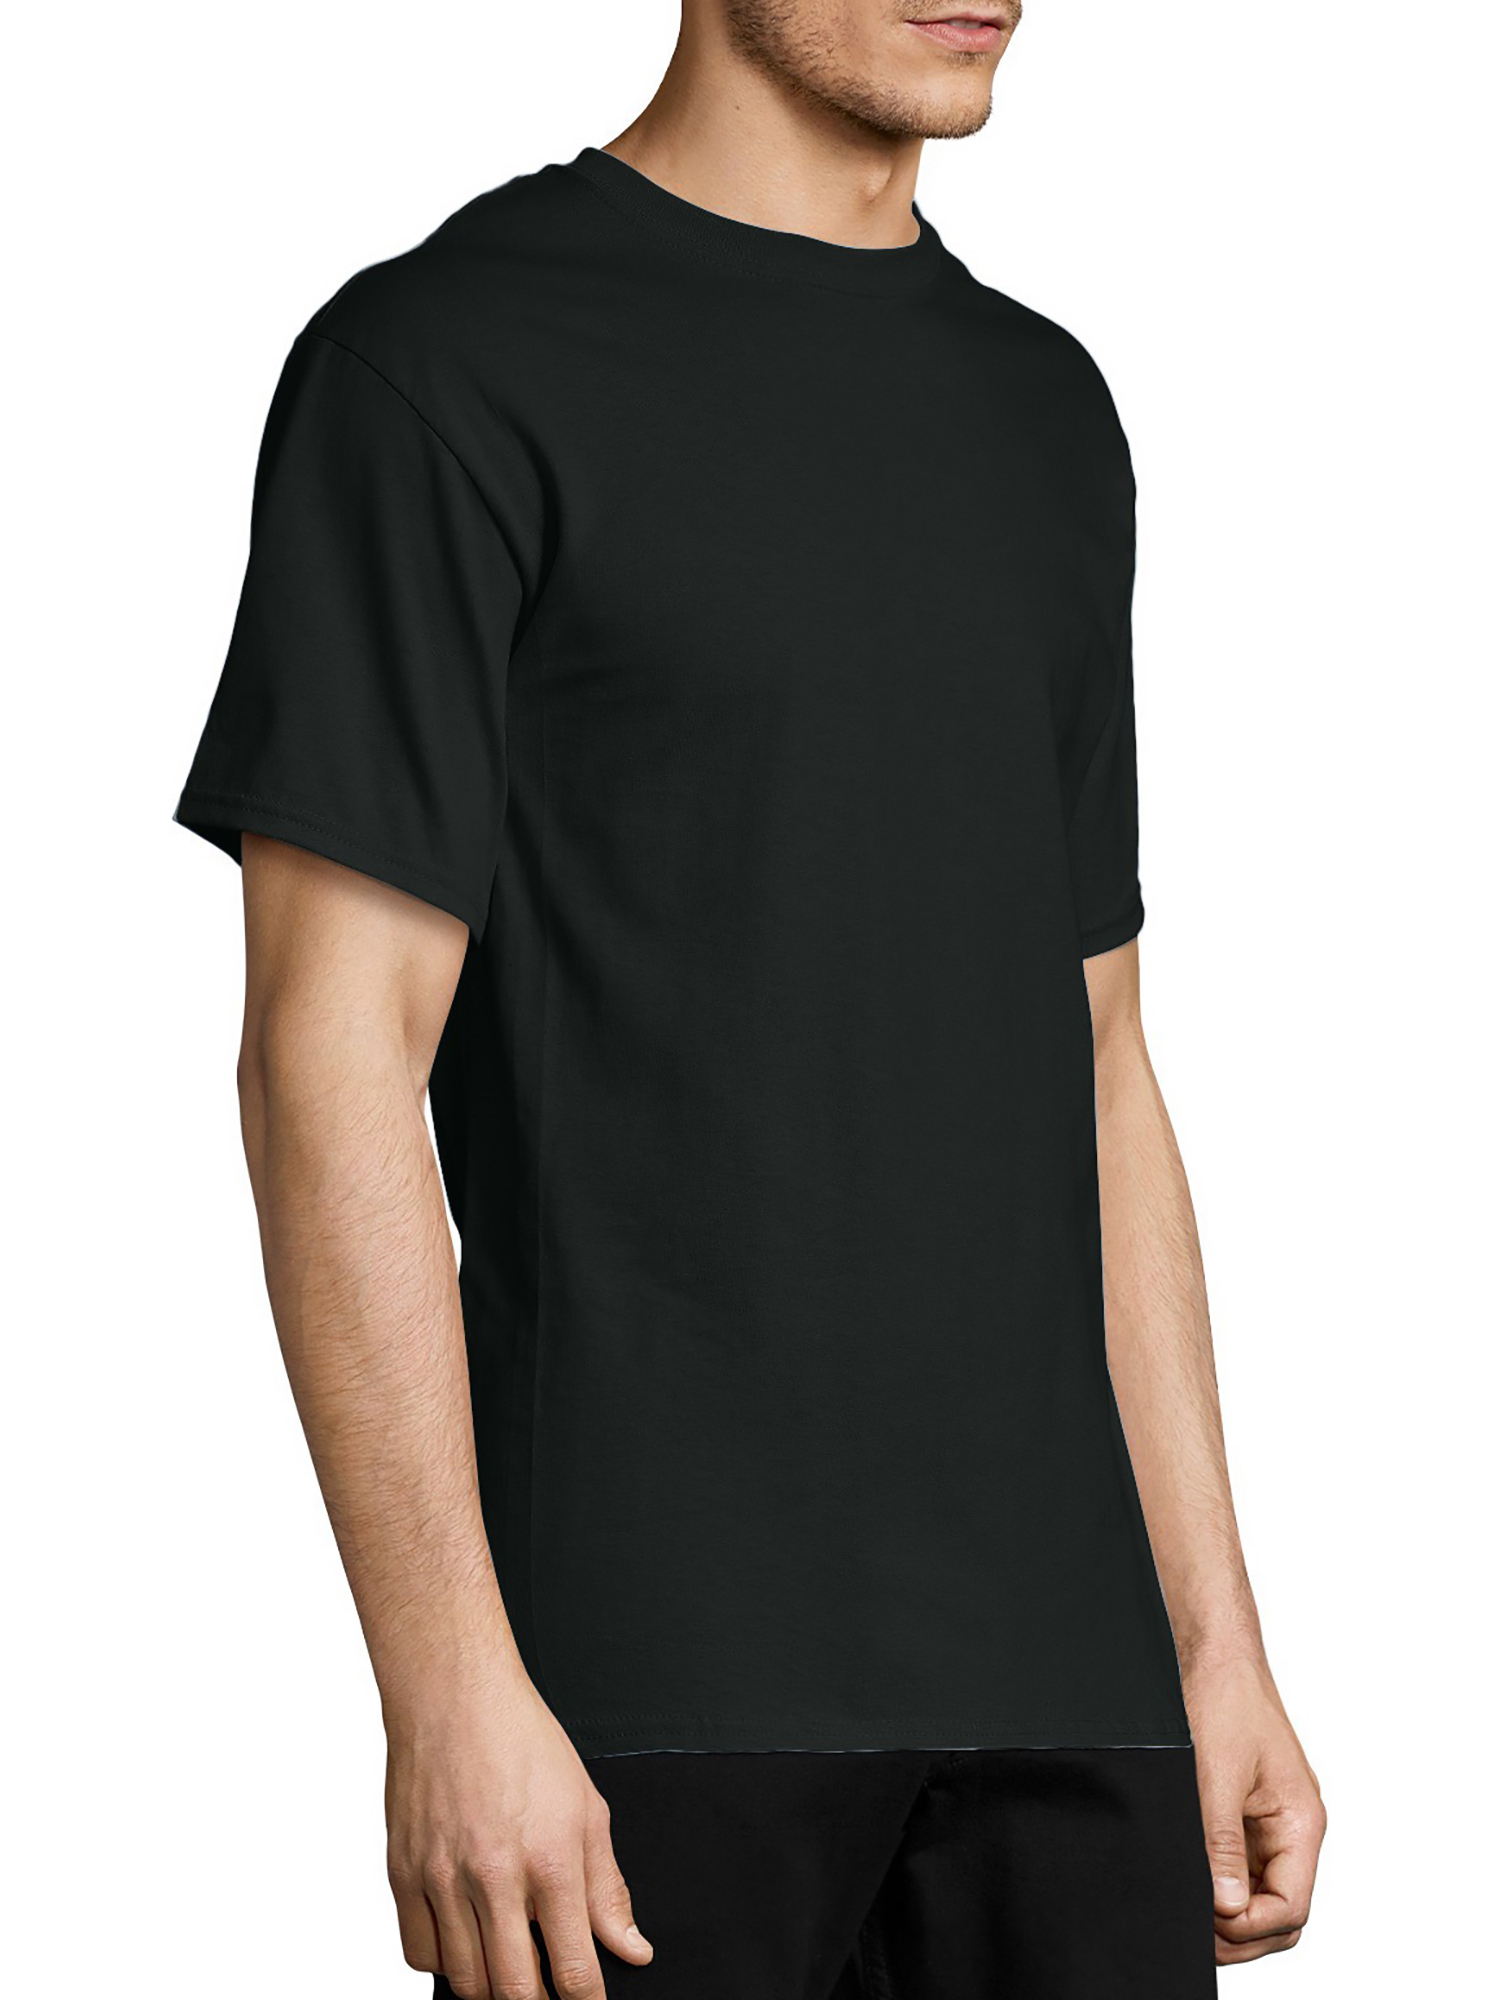 Hanes Authentic Men's T-Shirt (Big & Tall Sizes Available) Black 5XL - image 3 of 5